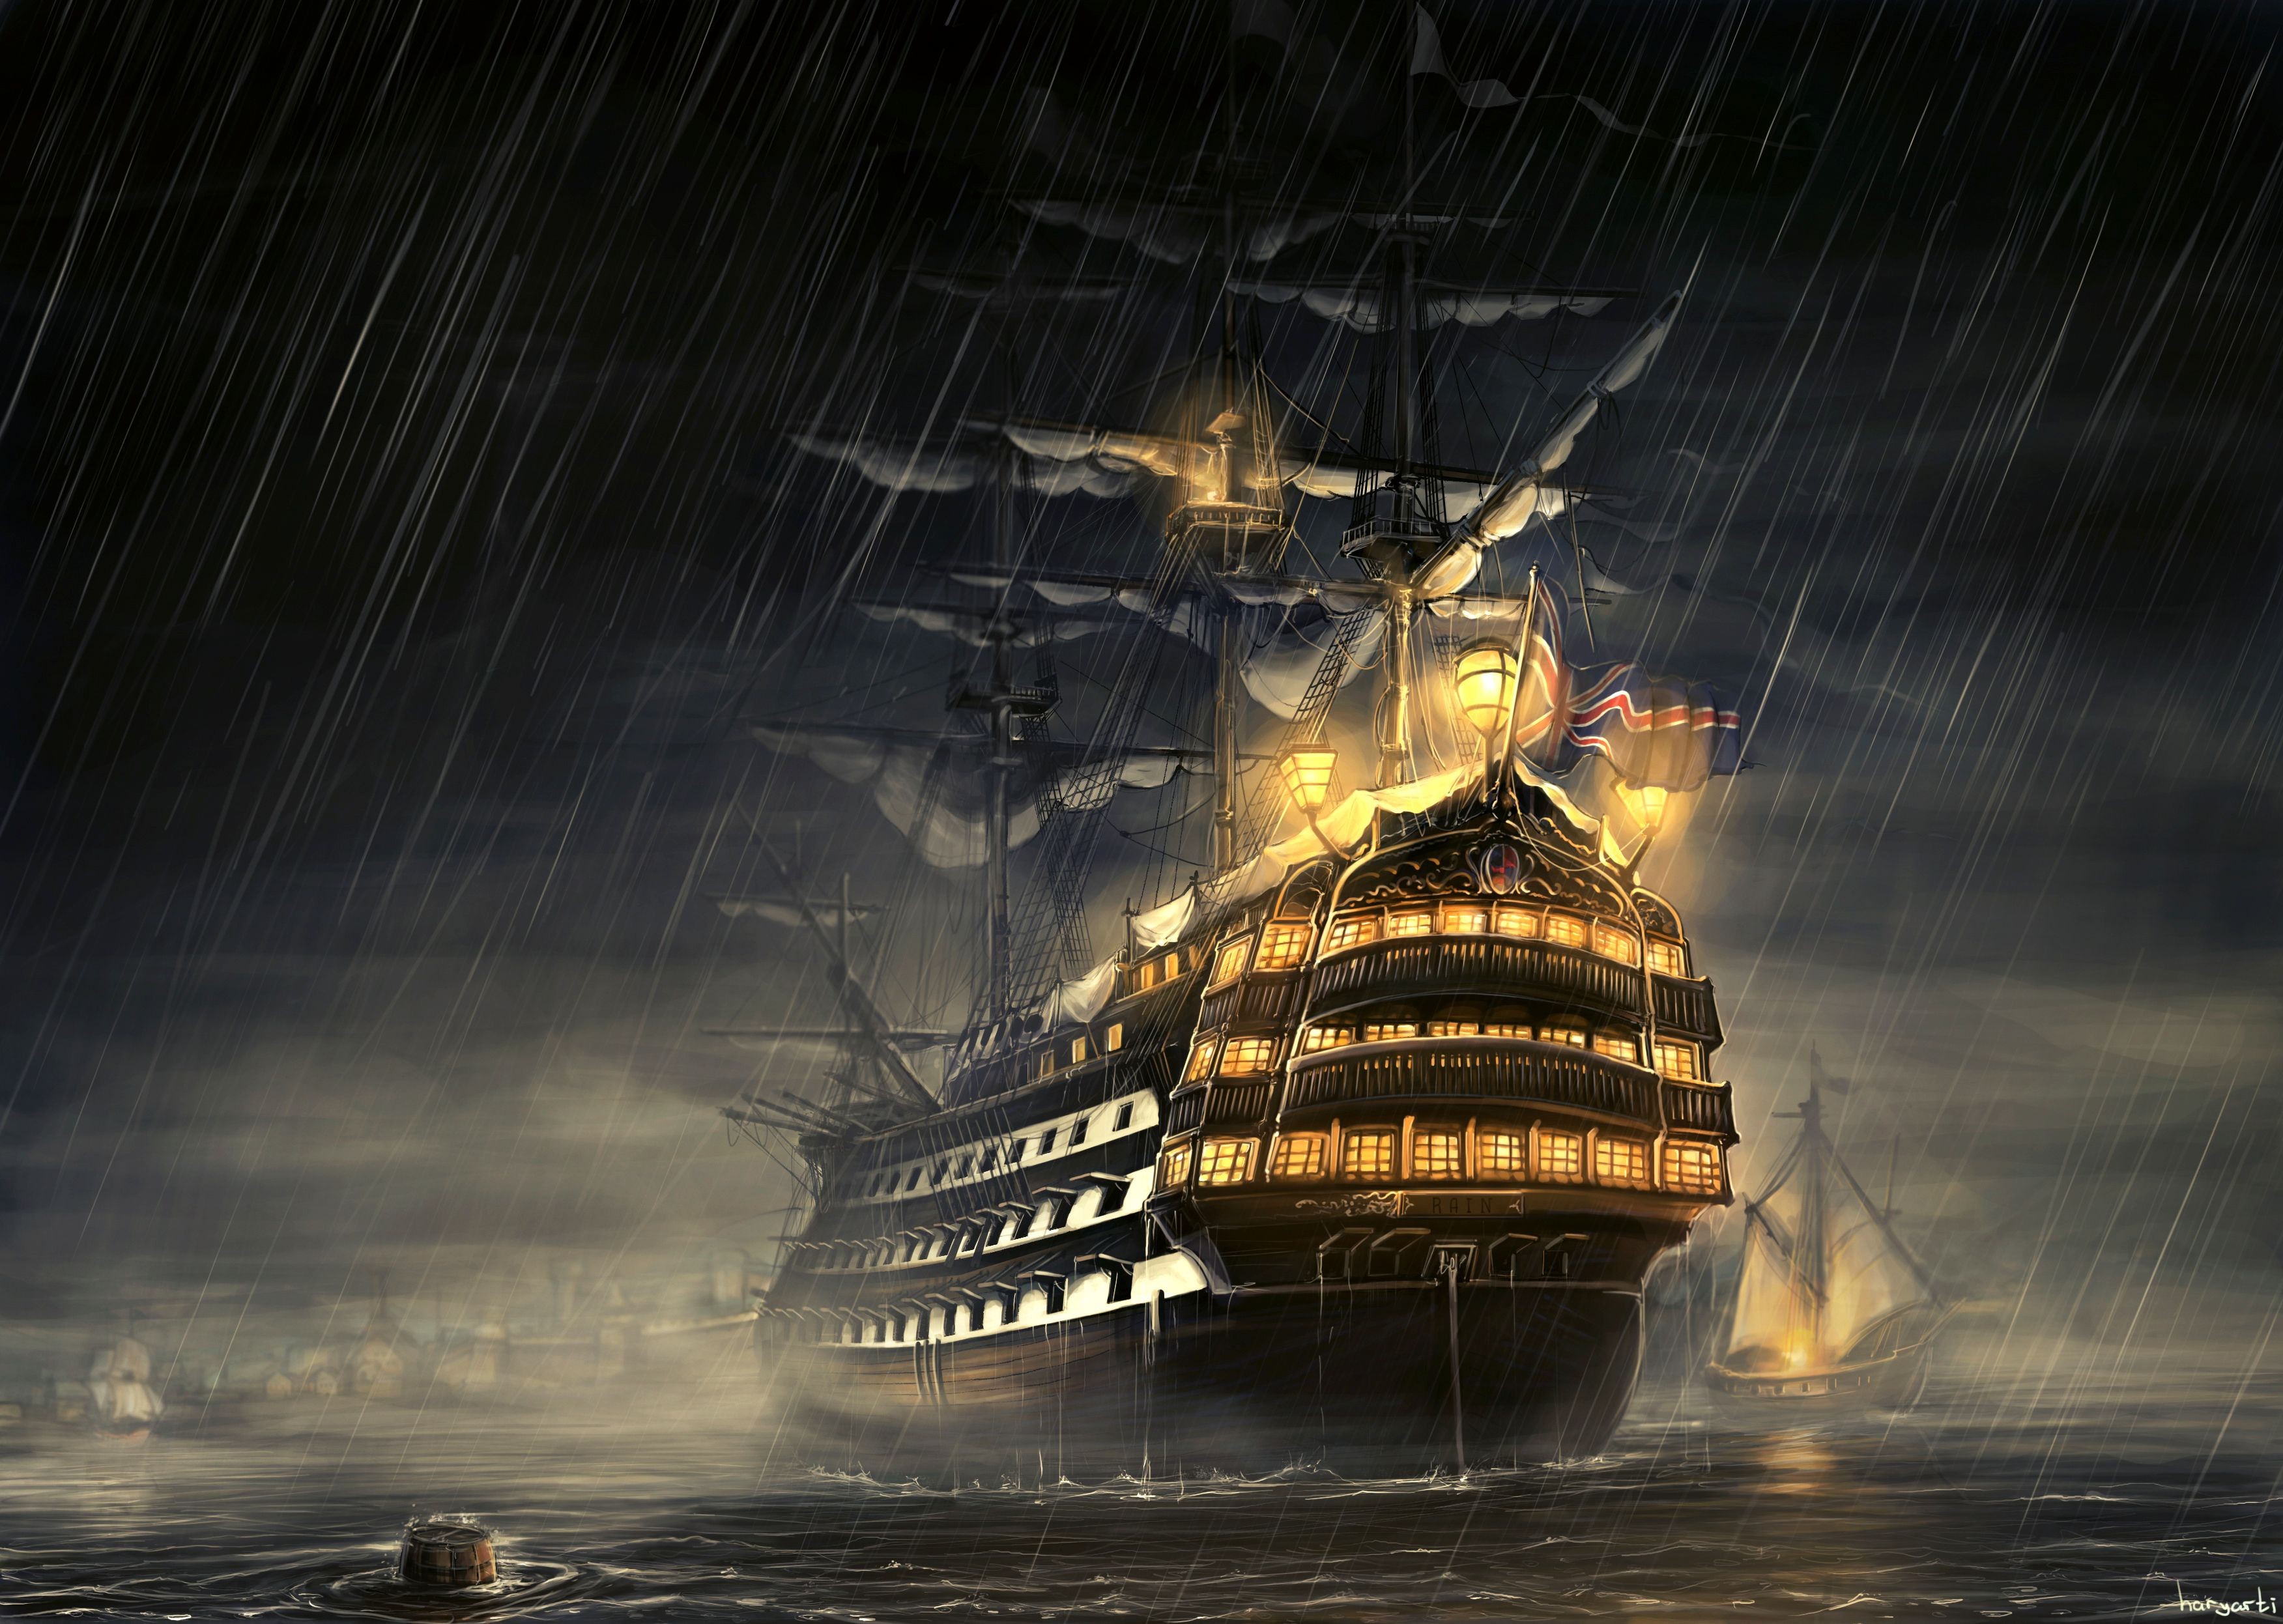 Ship Wallpaper Images in HD Available Here For Free Download